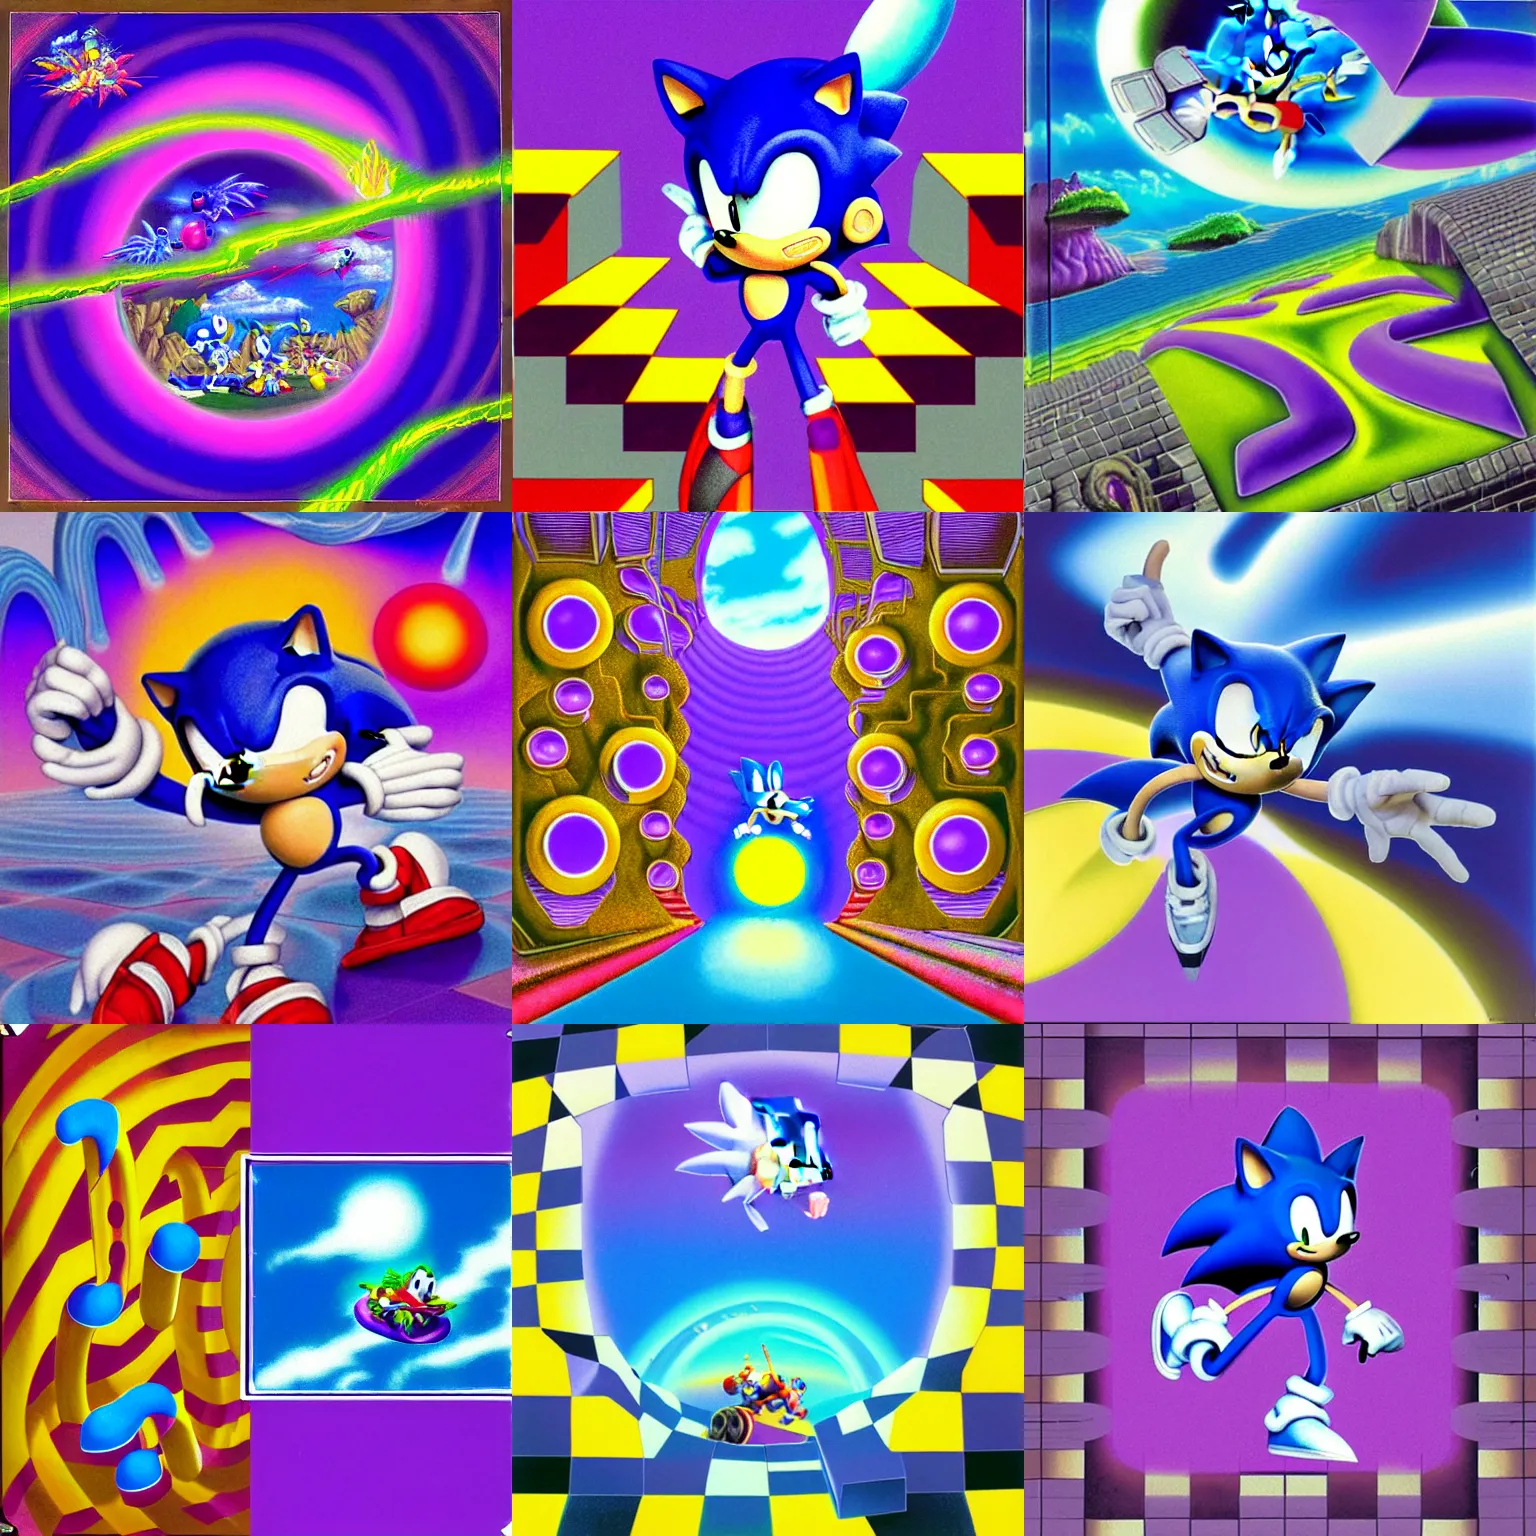 Prompt: portal to sonic hedgehog and a matte painting landscape of a surreal, sharp, detailed professional, soft pastels, high quality airbrush art album cover of a liquid dissolving airbrush art lsd dmt sonic the hedgehog swimming through cyberspace, purple checkerboard background, 1 9 9 0 s 1 9 9 2 sega genesis rareware video game album cover